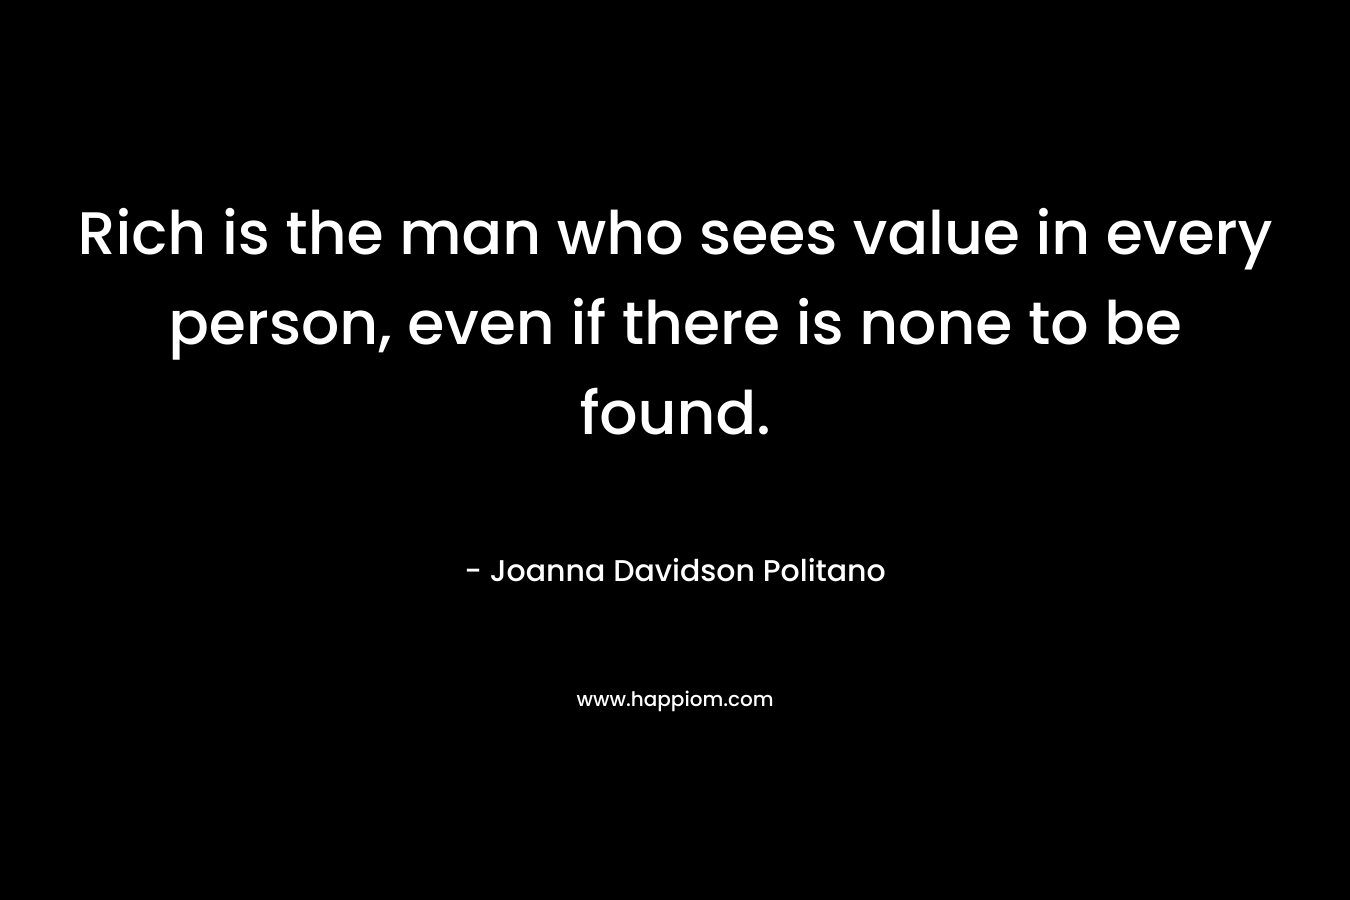 Rich is the man who sees value in every person, even if there is none to be found.